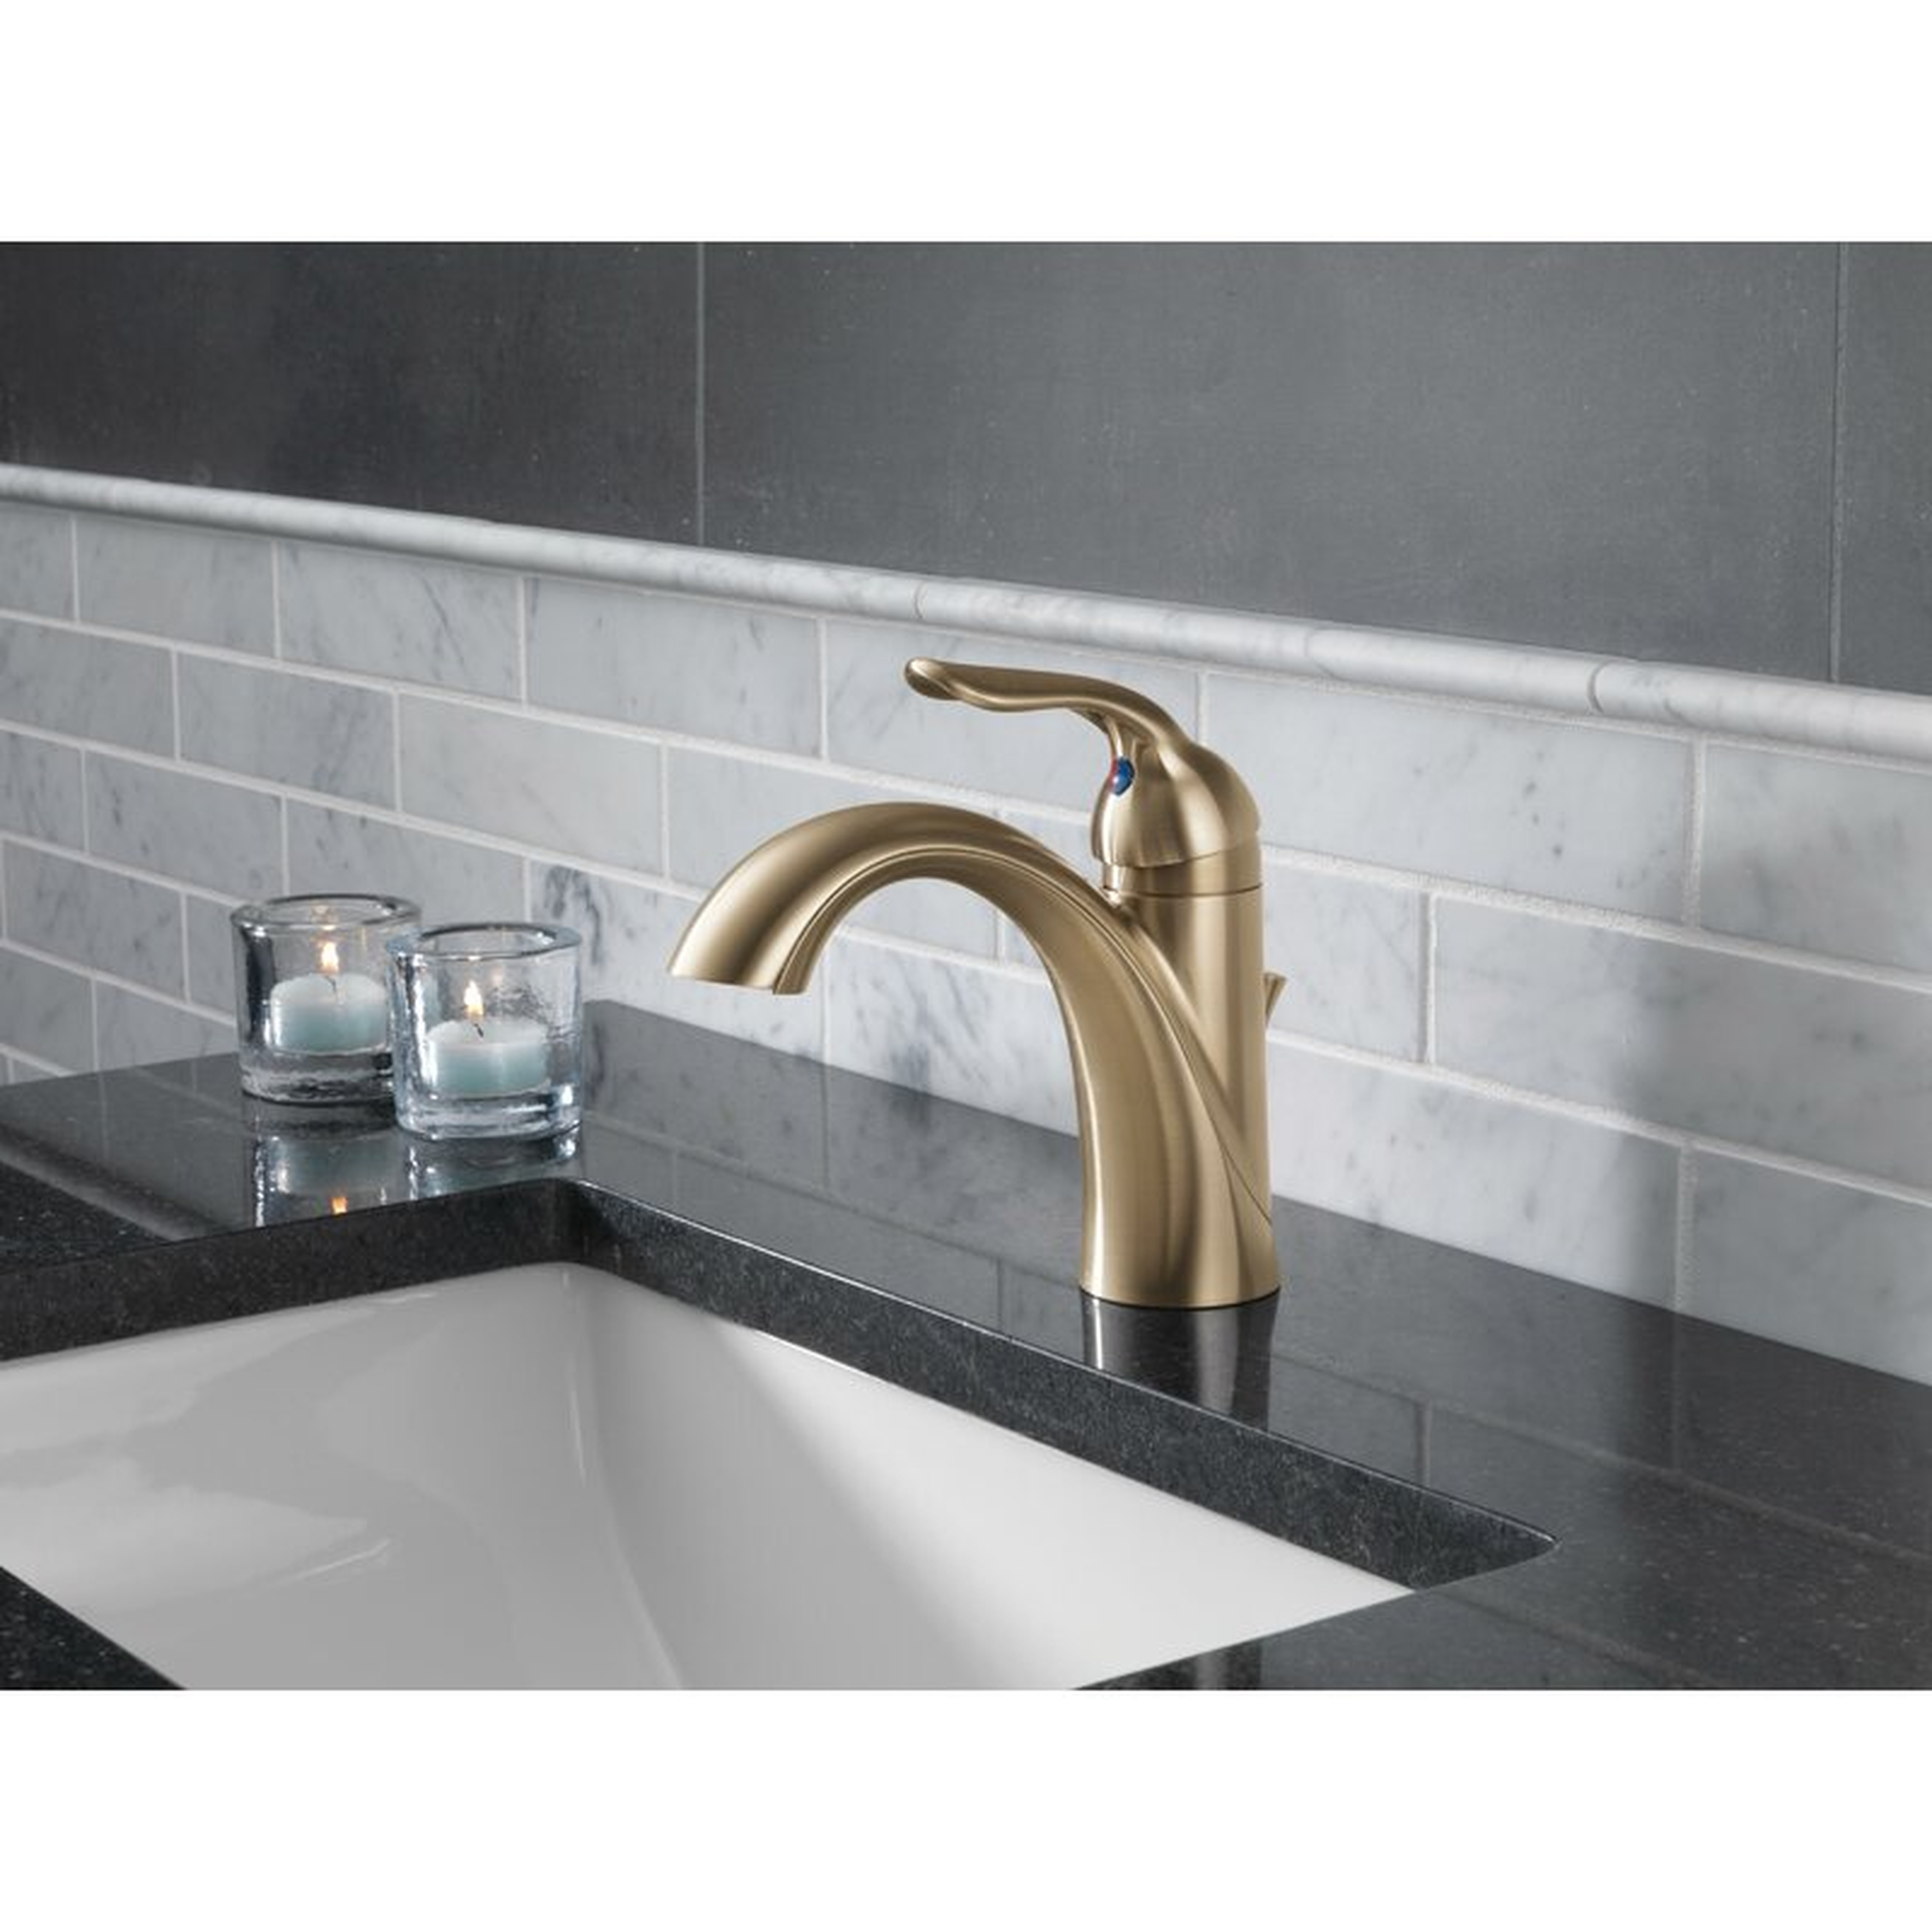 538-CZMPU-DST Lahara Delta Bathroom Faucet with Drain Assembly and Diamond Seal Technology - Wayfair